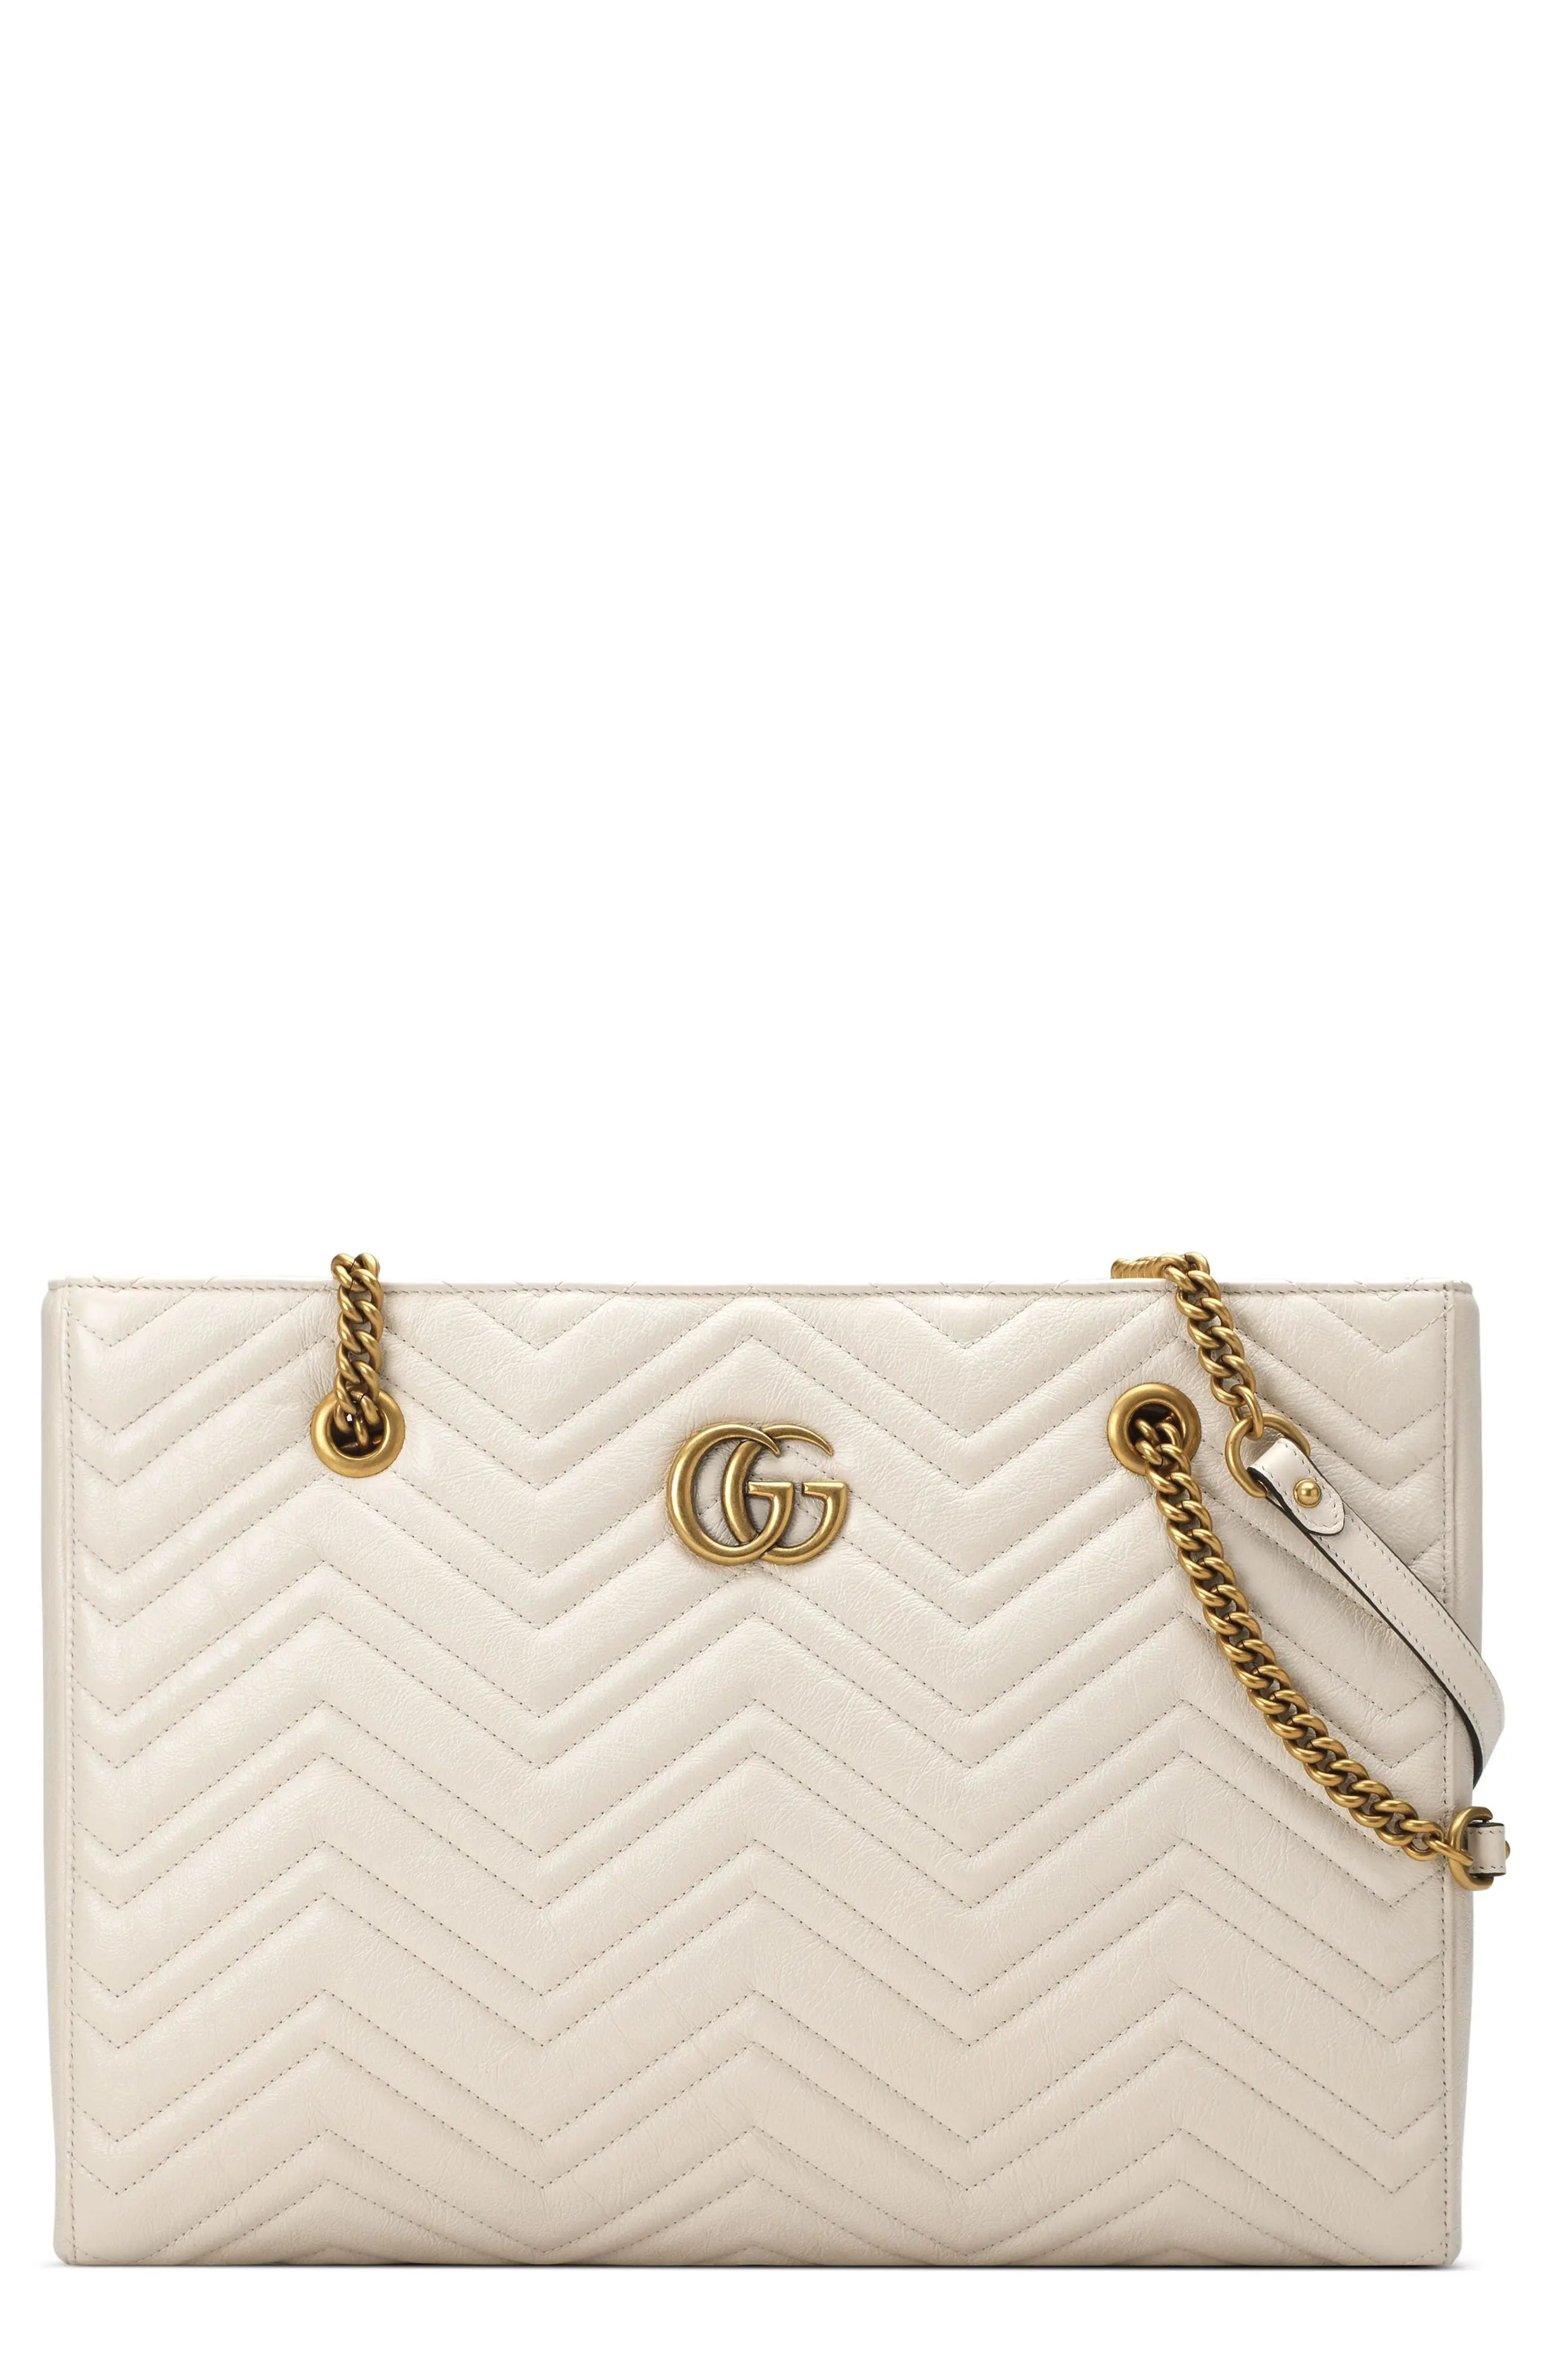 Gucci Gg Marmont 2.0 Matelasse Medium Leather East/west Tote Bag - White | Nordstrom